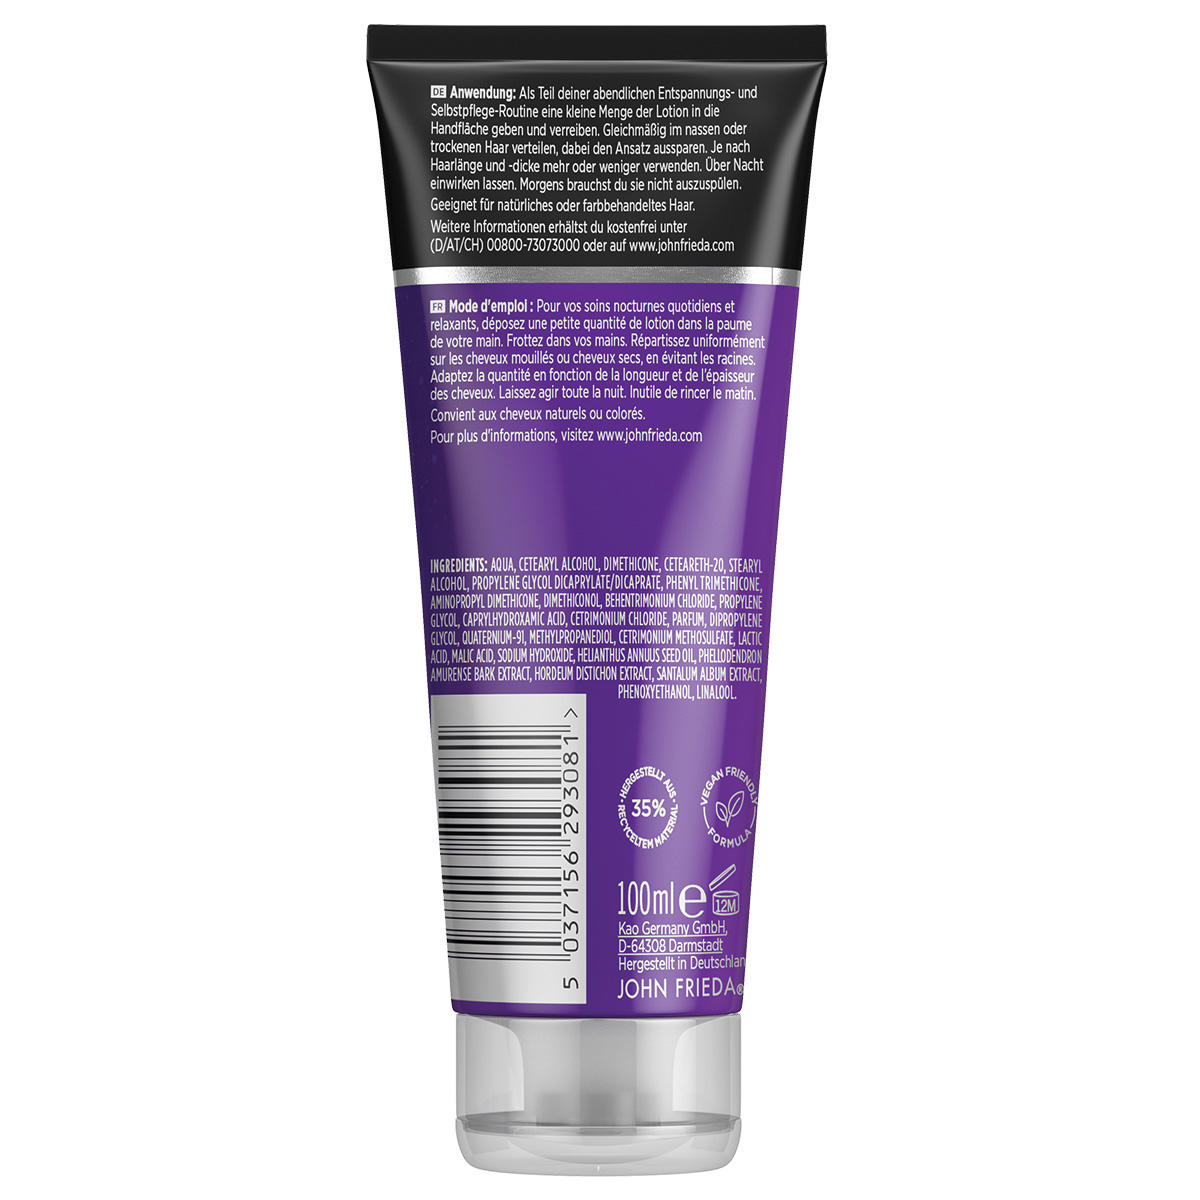 JOHN FRIEDA Frizz Ease Miracle Repair Lozione Notte Riparatrice e Rinnovatrice 100 ml - 2